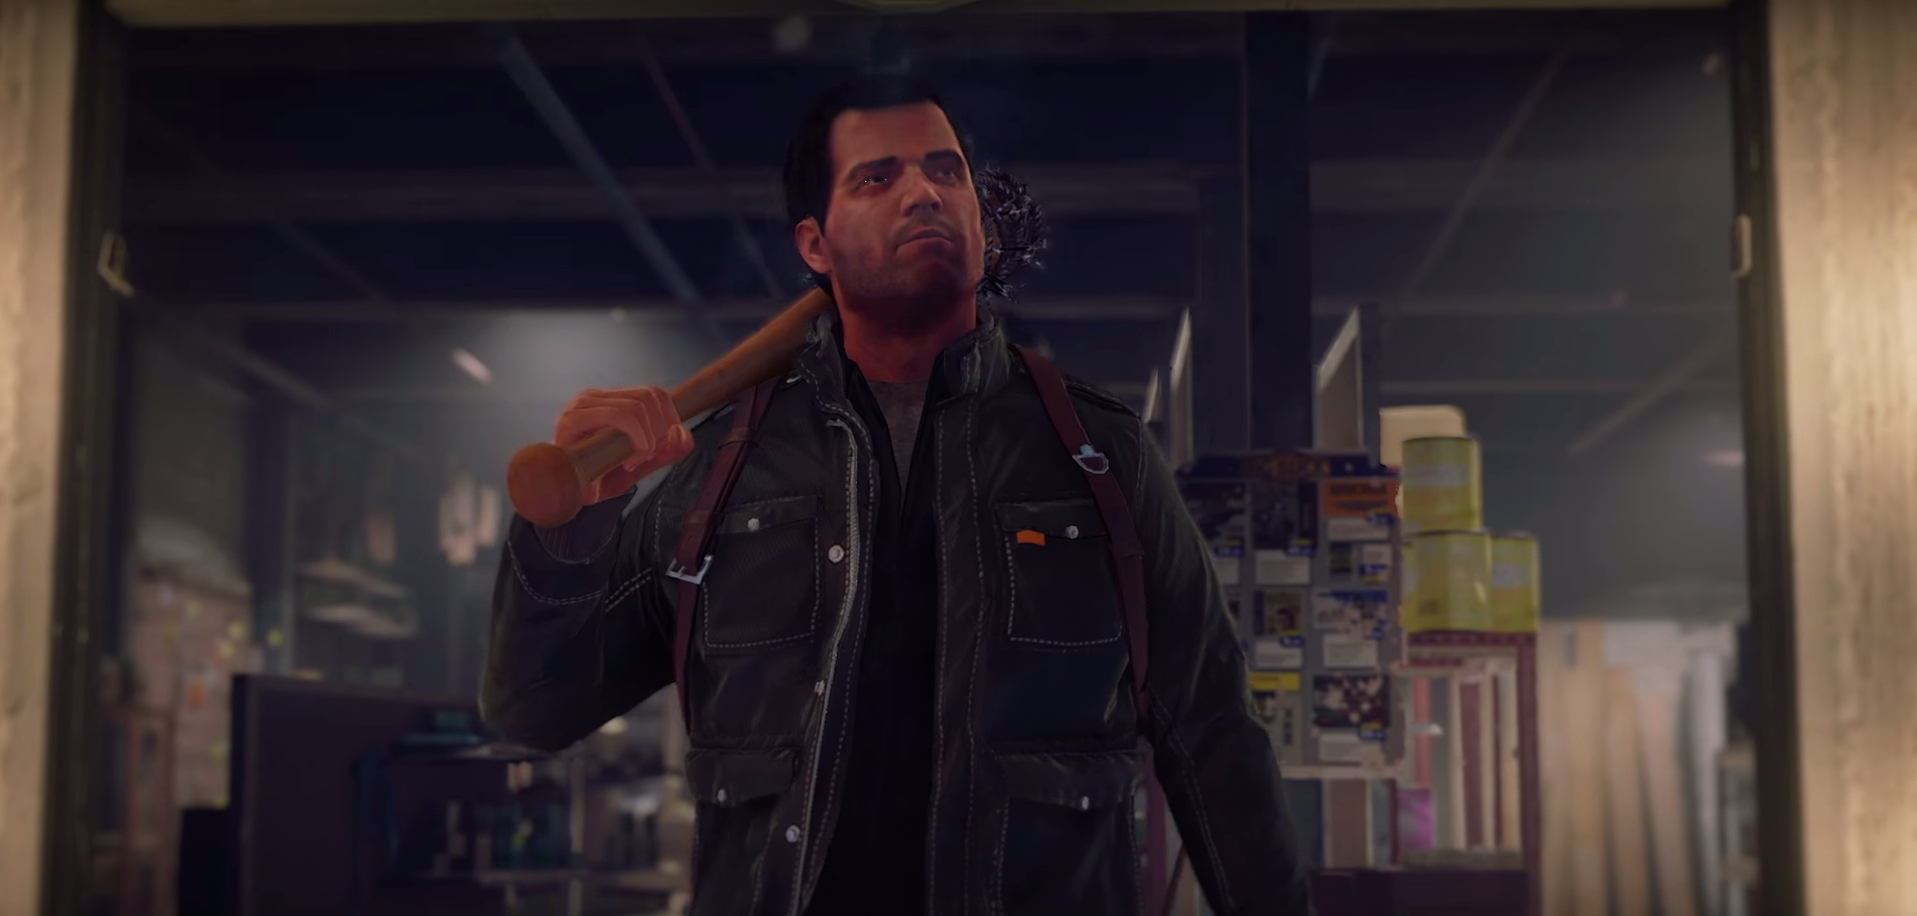 Dead Rising 4 PS4 Review - Crazy weapons — Steemit